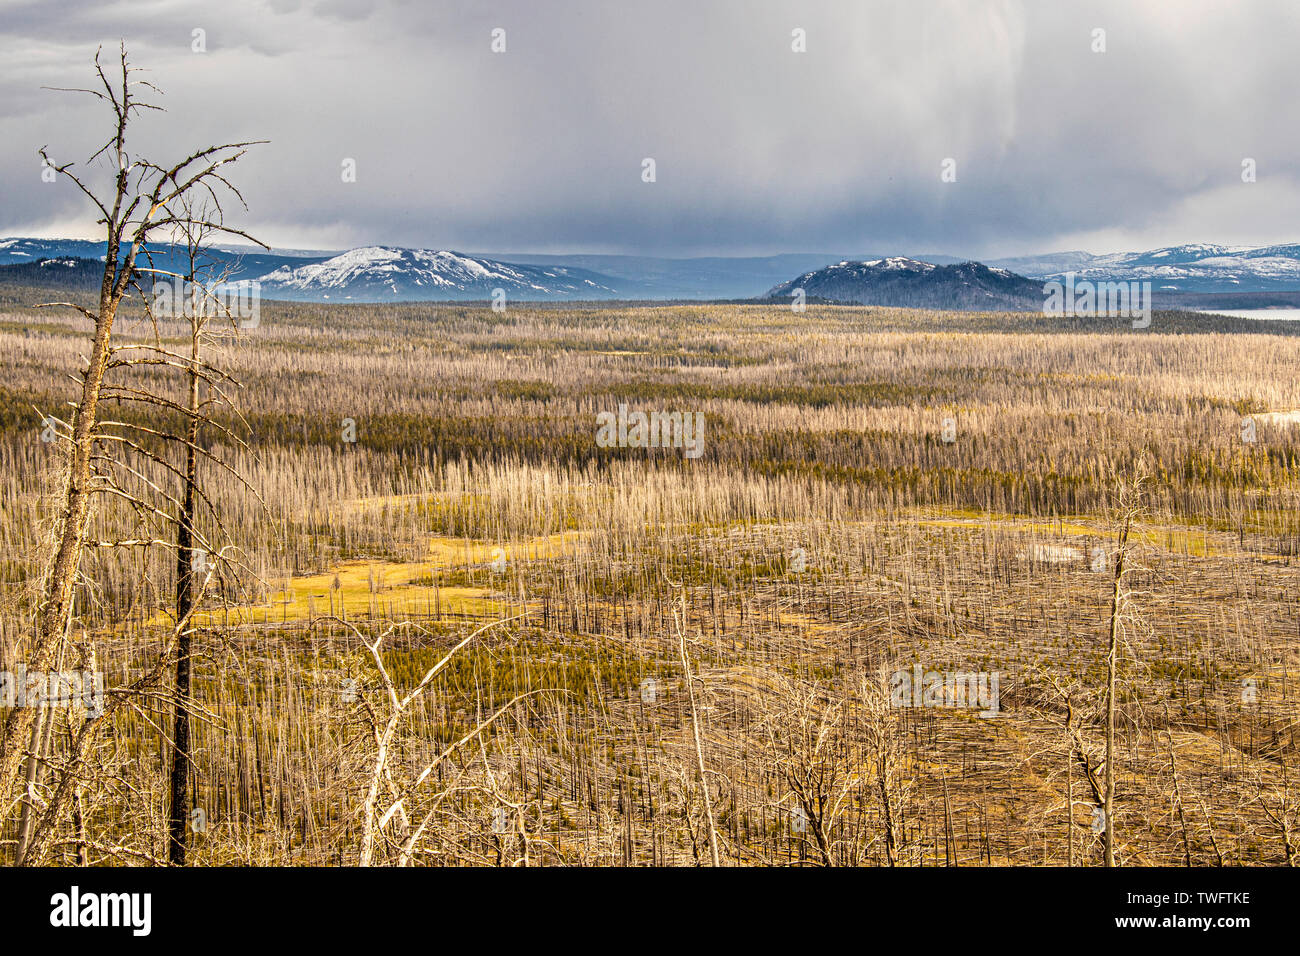 Lake Butte Overlook, looking towards Avalanche Peak, Yellowstone National Park, Wyoming, USA Stock Photo